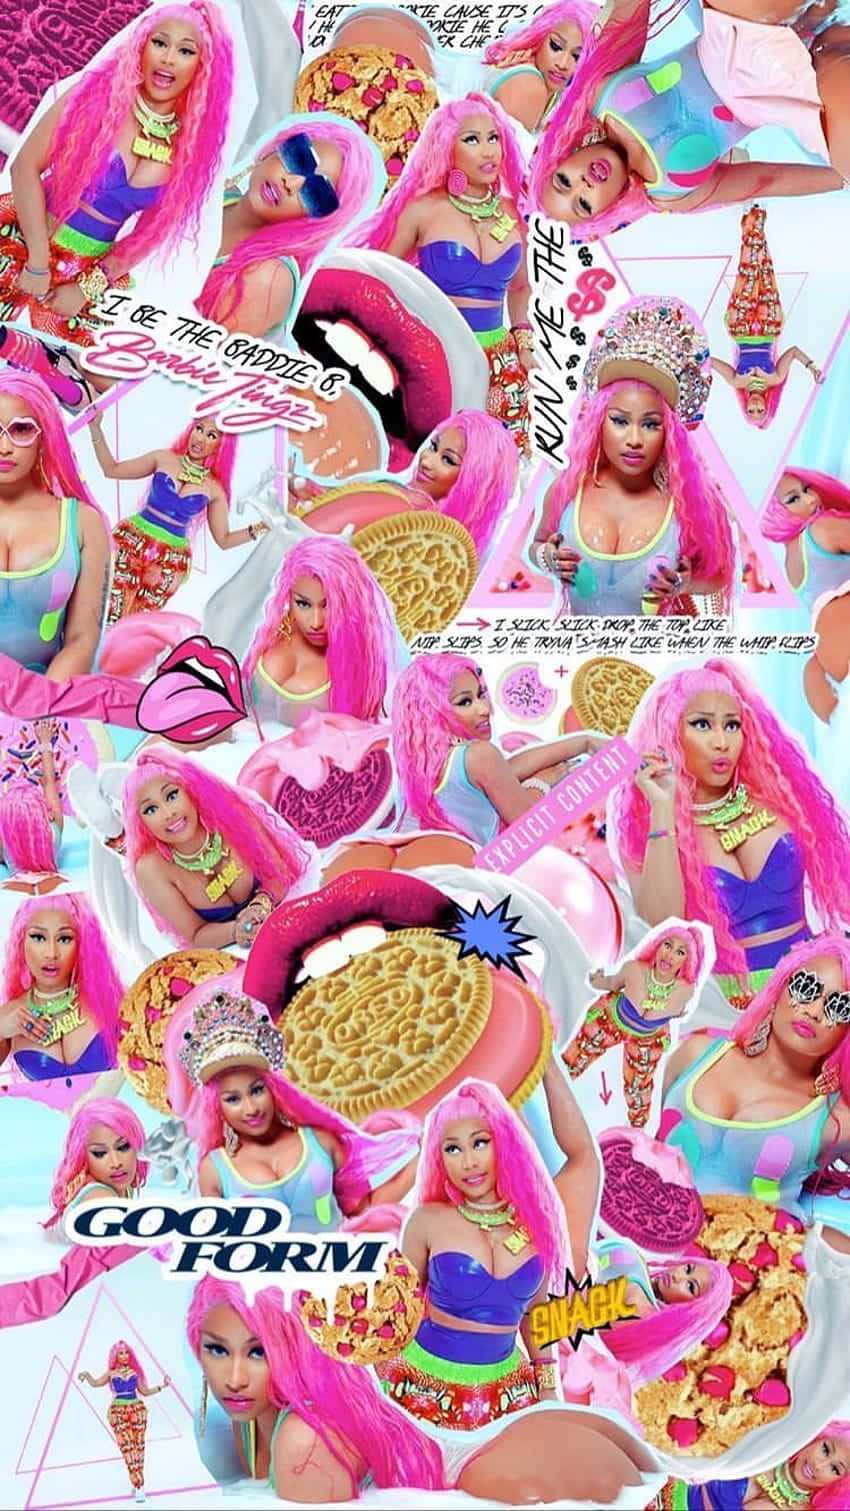 Pink Barbie Collage Aesthetic Wallpaper